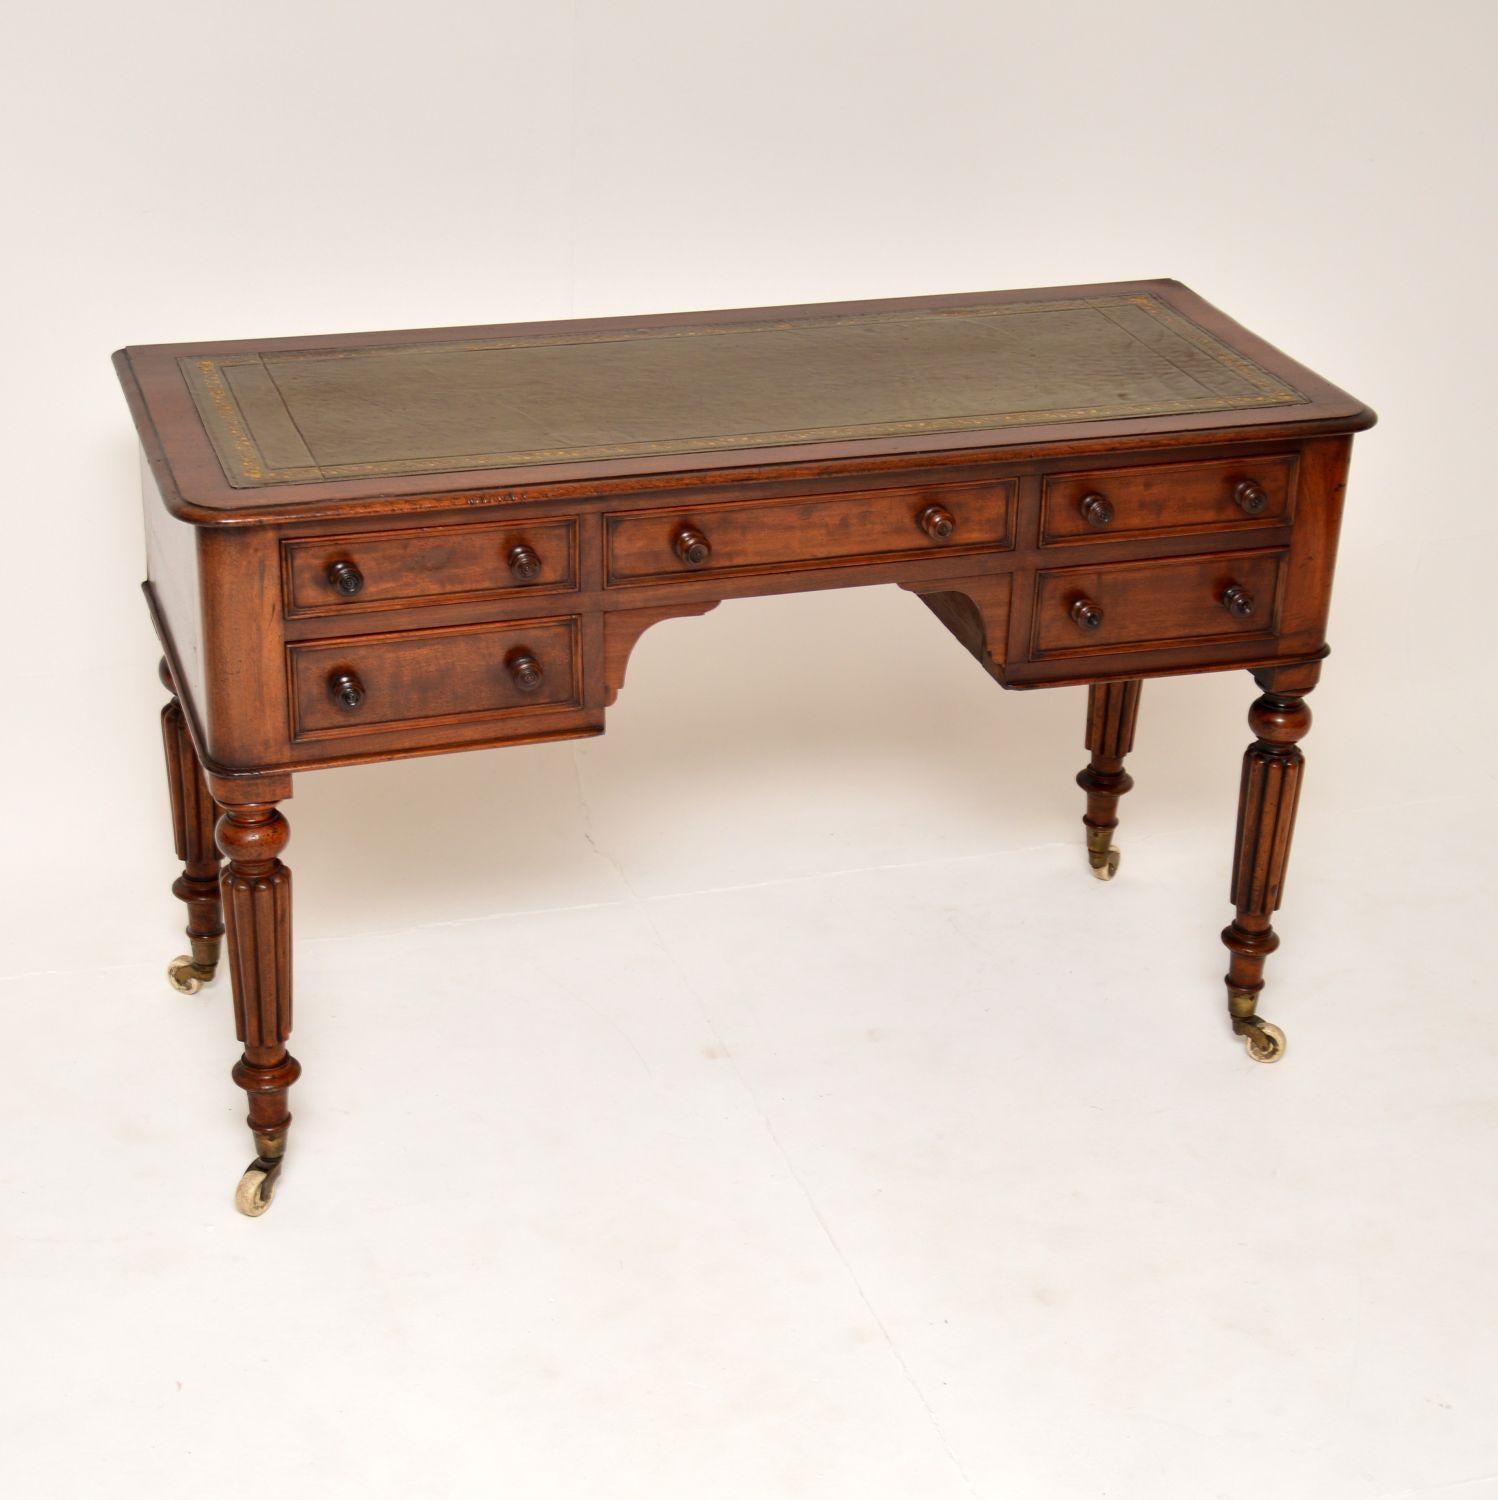 An excellent antique Victorian leather top desk. This was made in England, it dates from the 1840-1860 period.

It is of amazing quality, it sits on fluted baluster legs on original white porcelain casters. The drawers have nicely turned wooden